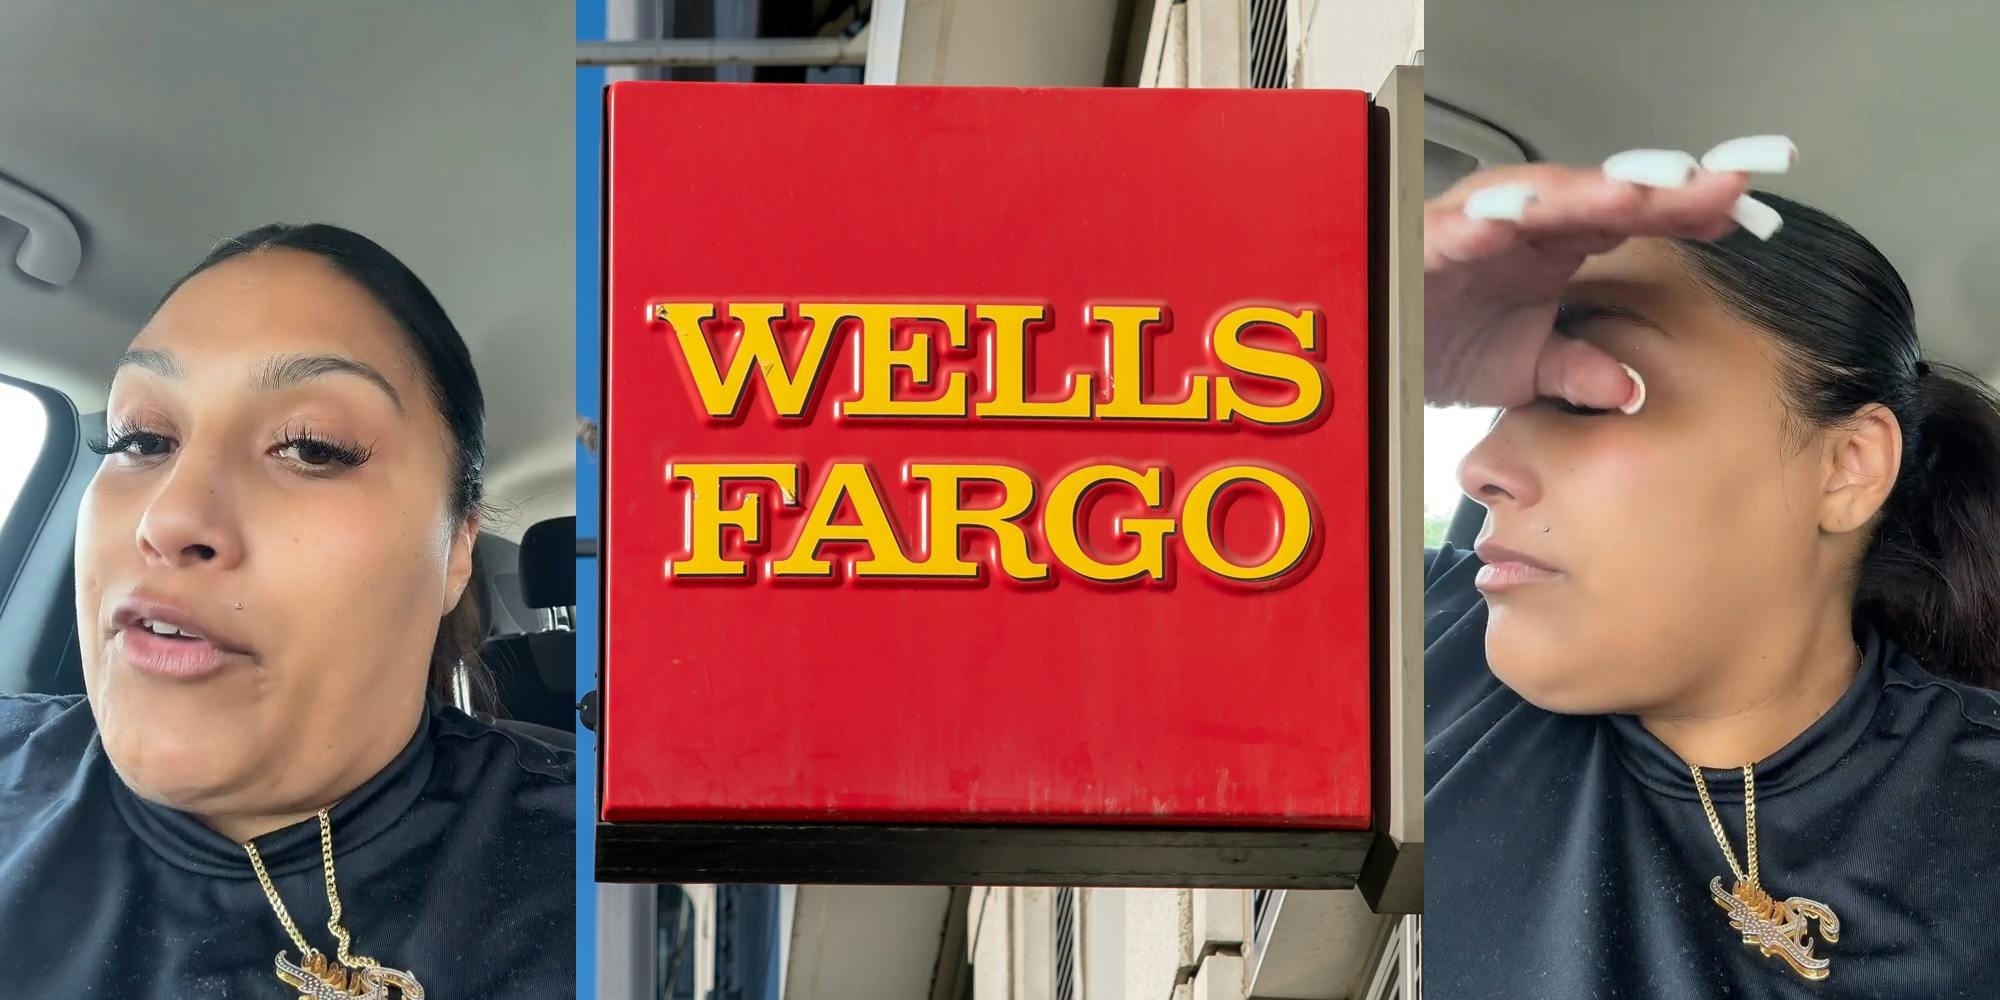 ‘You guys are just taking money out of people’s account’: Wells Fargo customer says over $550 is missing from her account and the bank is no help